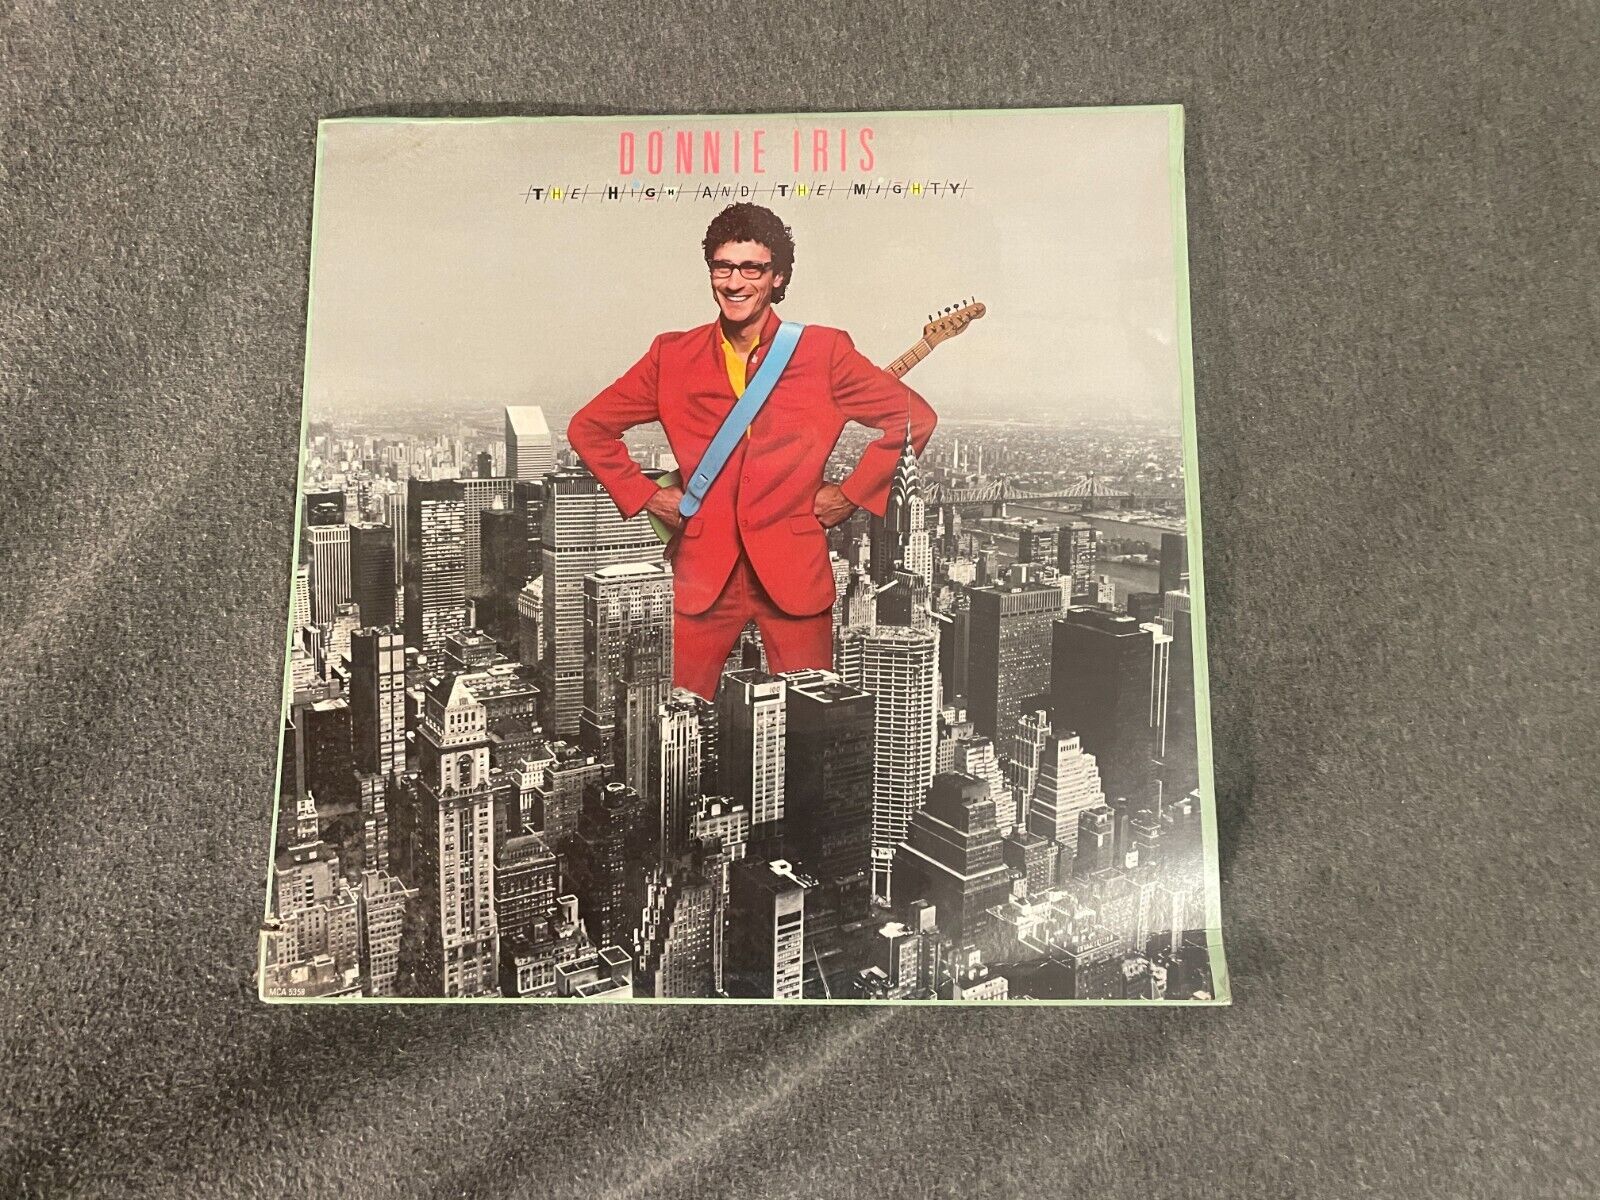 Donnie Iris SEALED LP - The High And The Mighty - MCA Records 1982